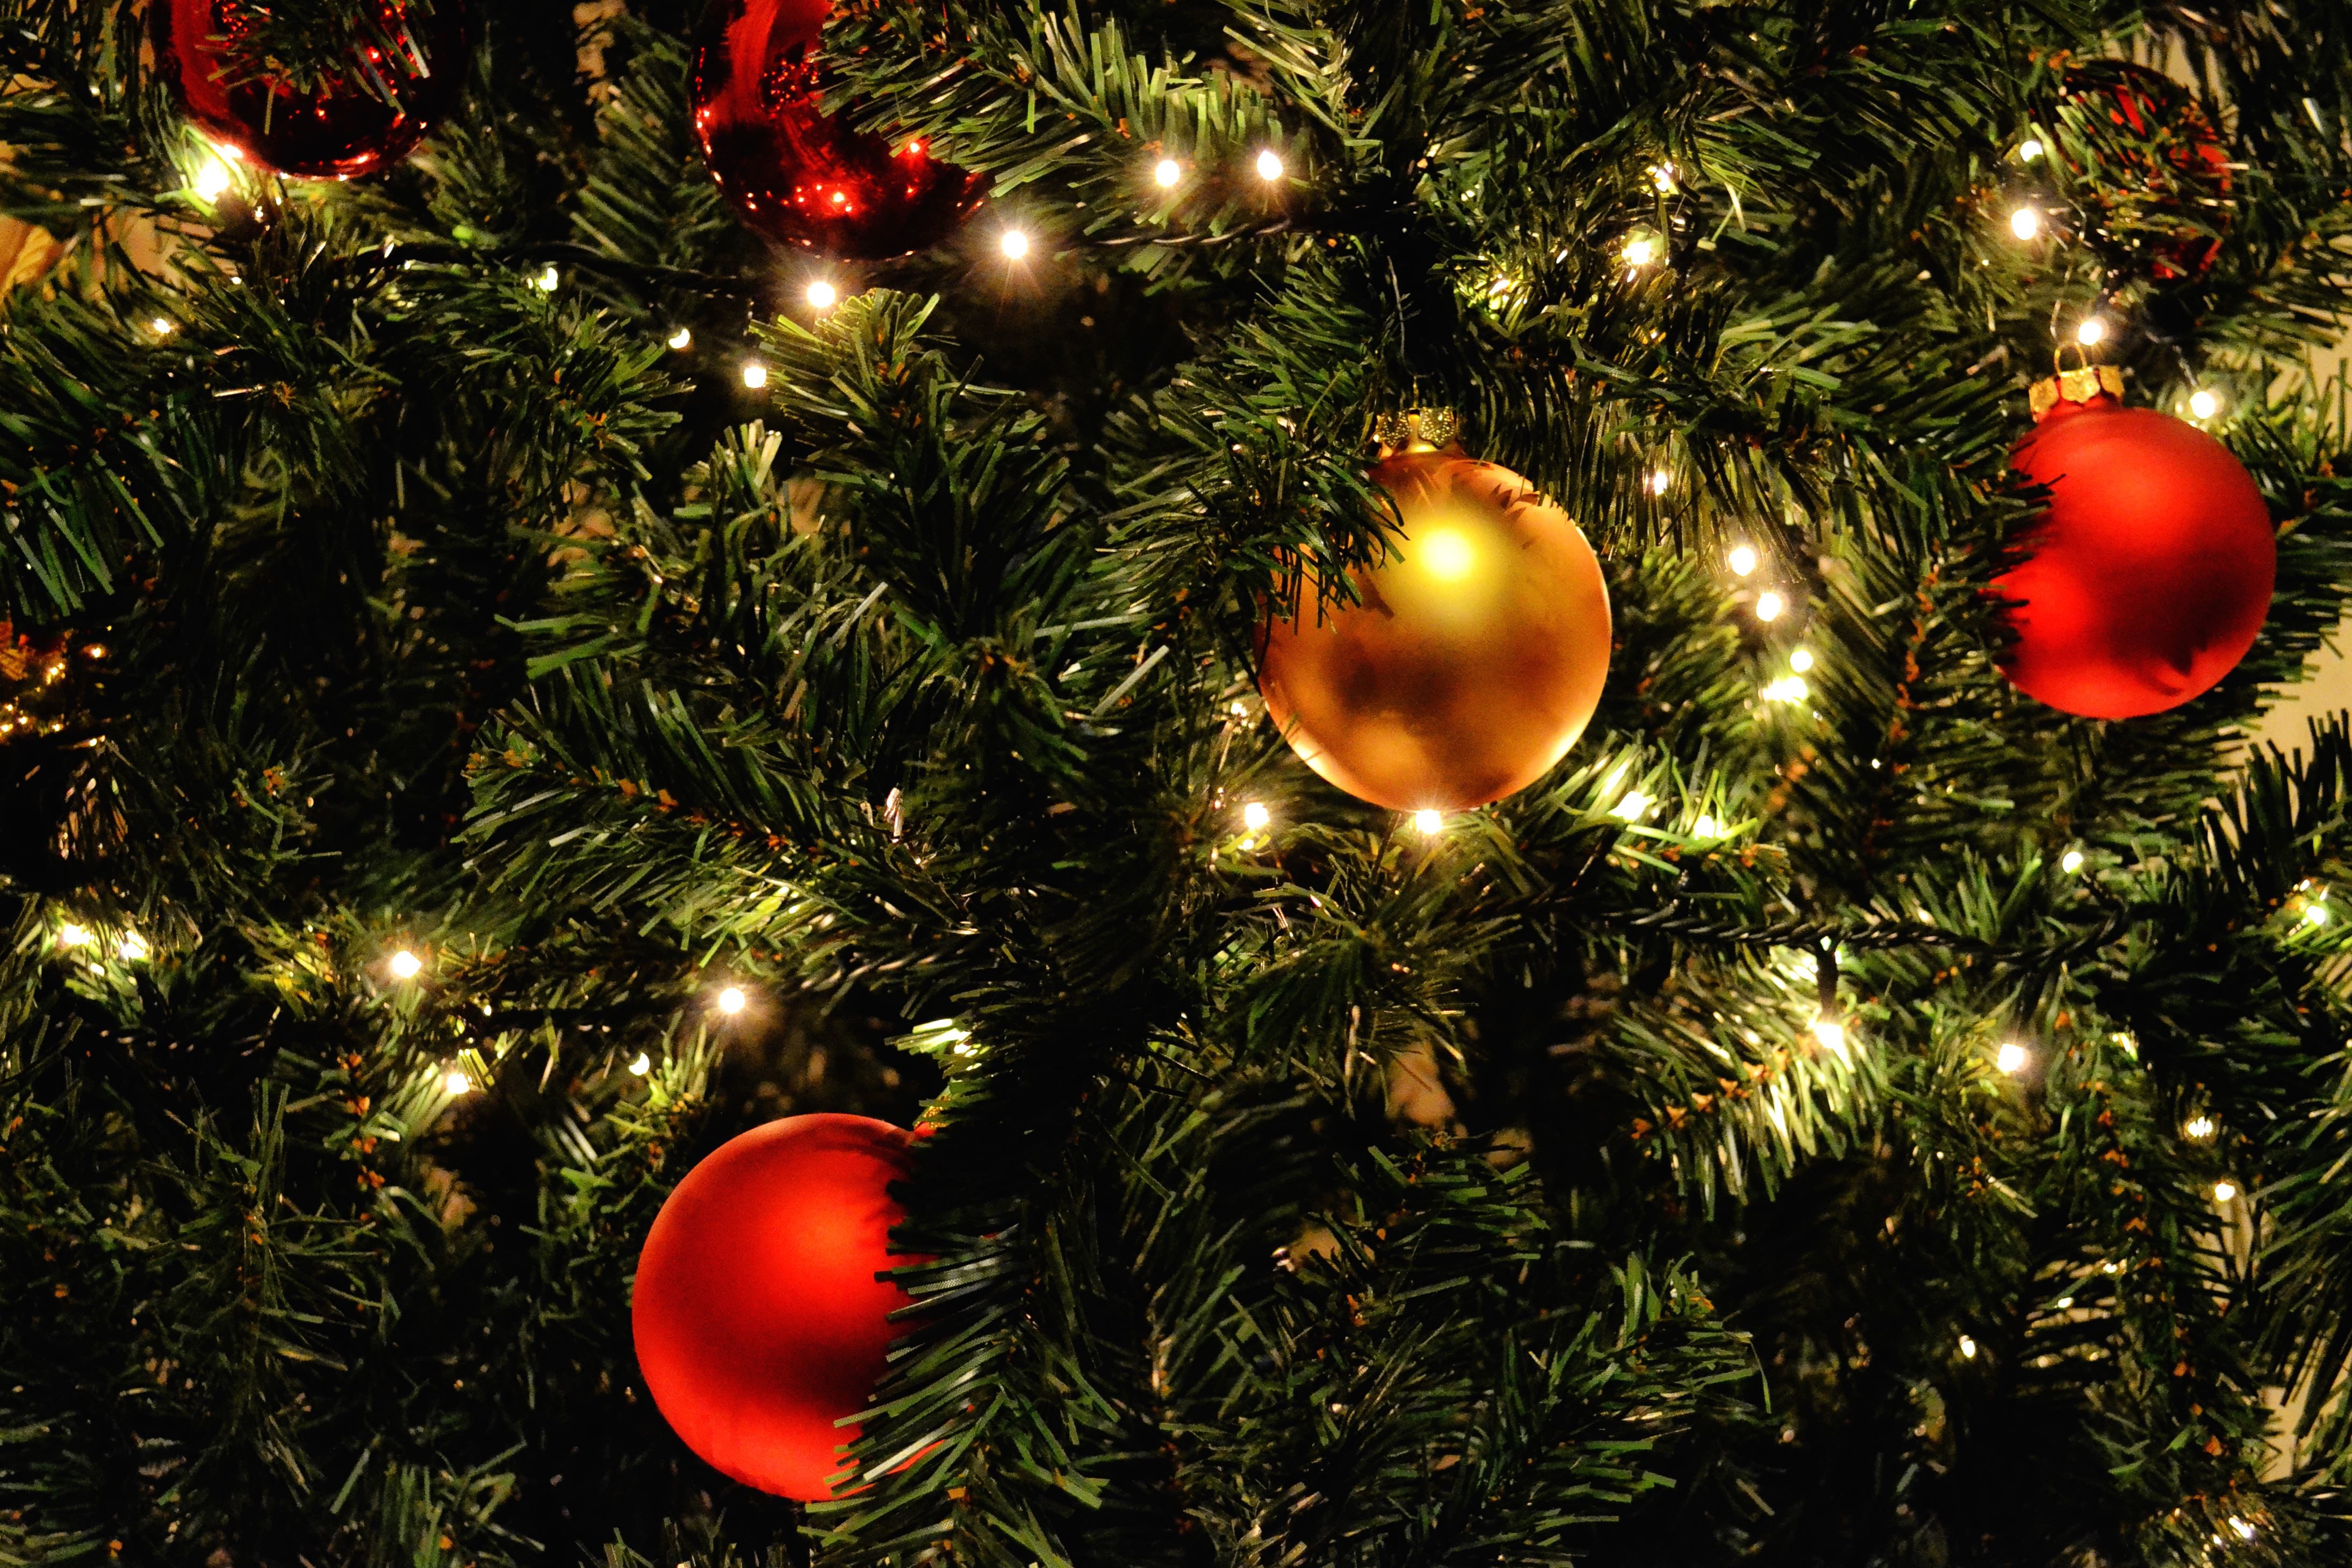 Free picture: decoration, sphere, spruce tree, Christmas, balls, ornament